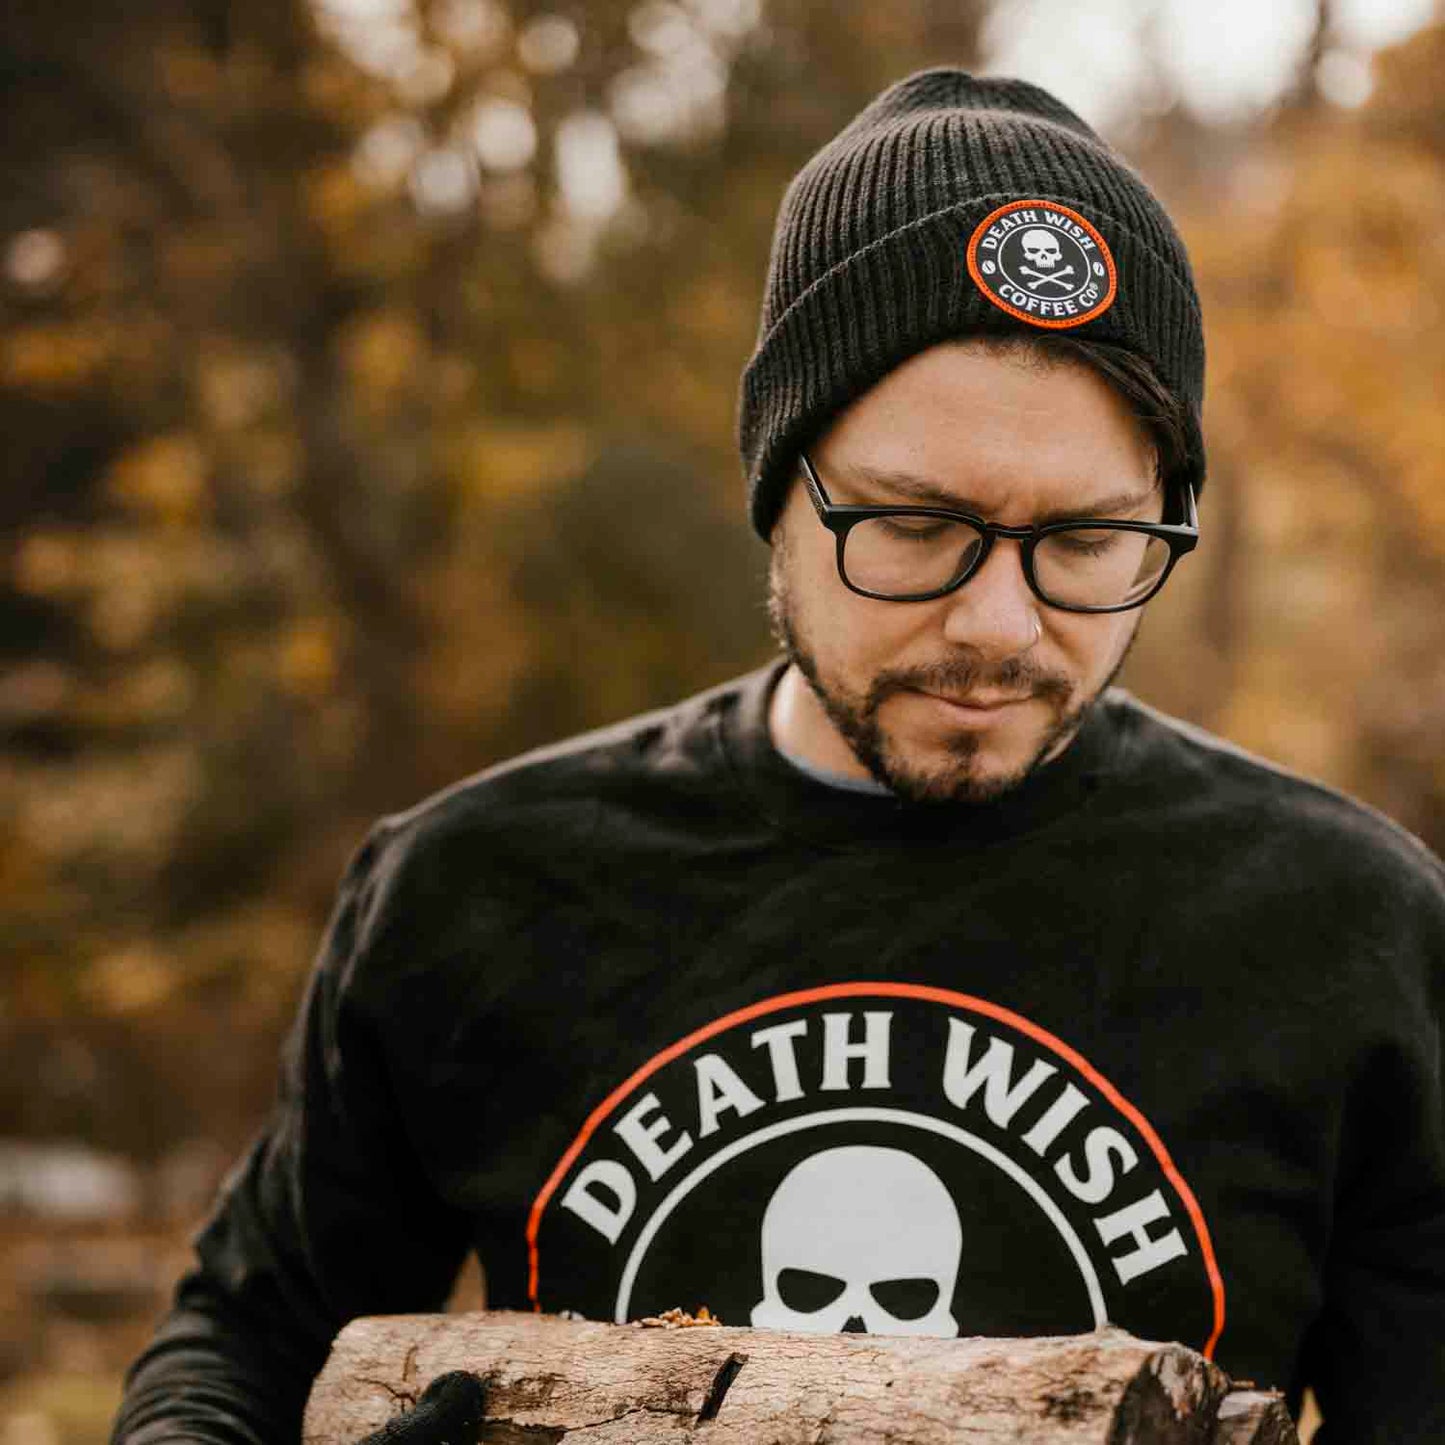 Gathering firewood wearing the Death Wish Coffee Classic Beanie.